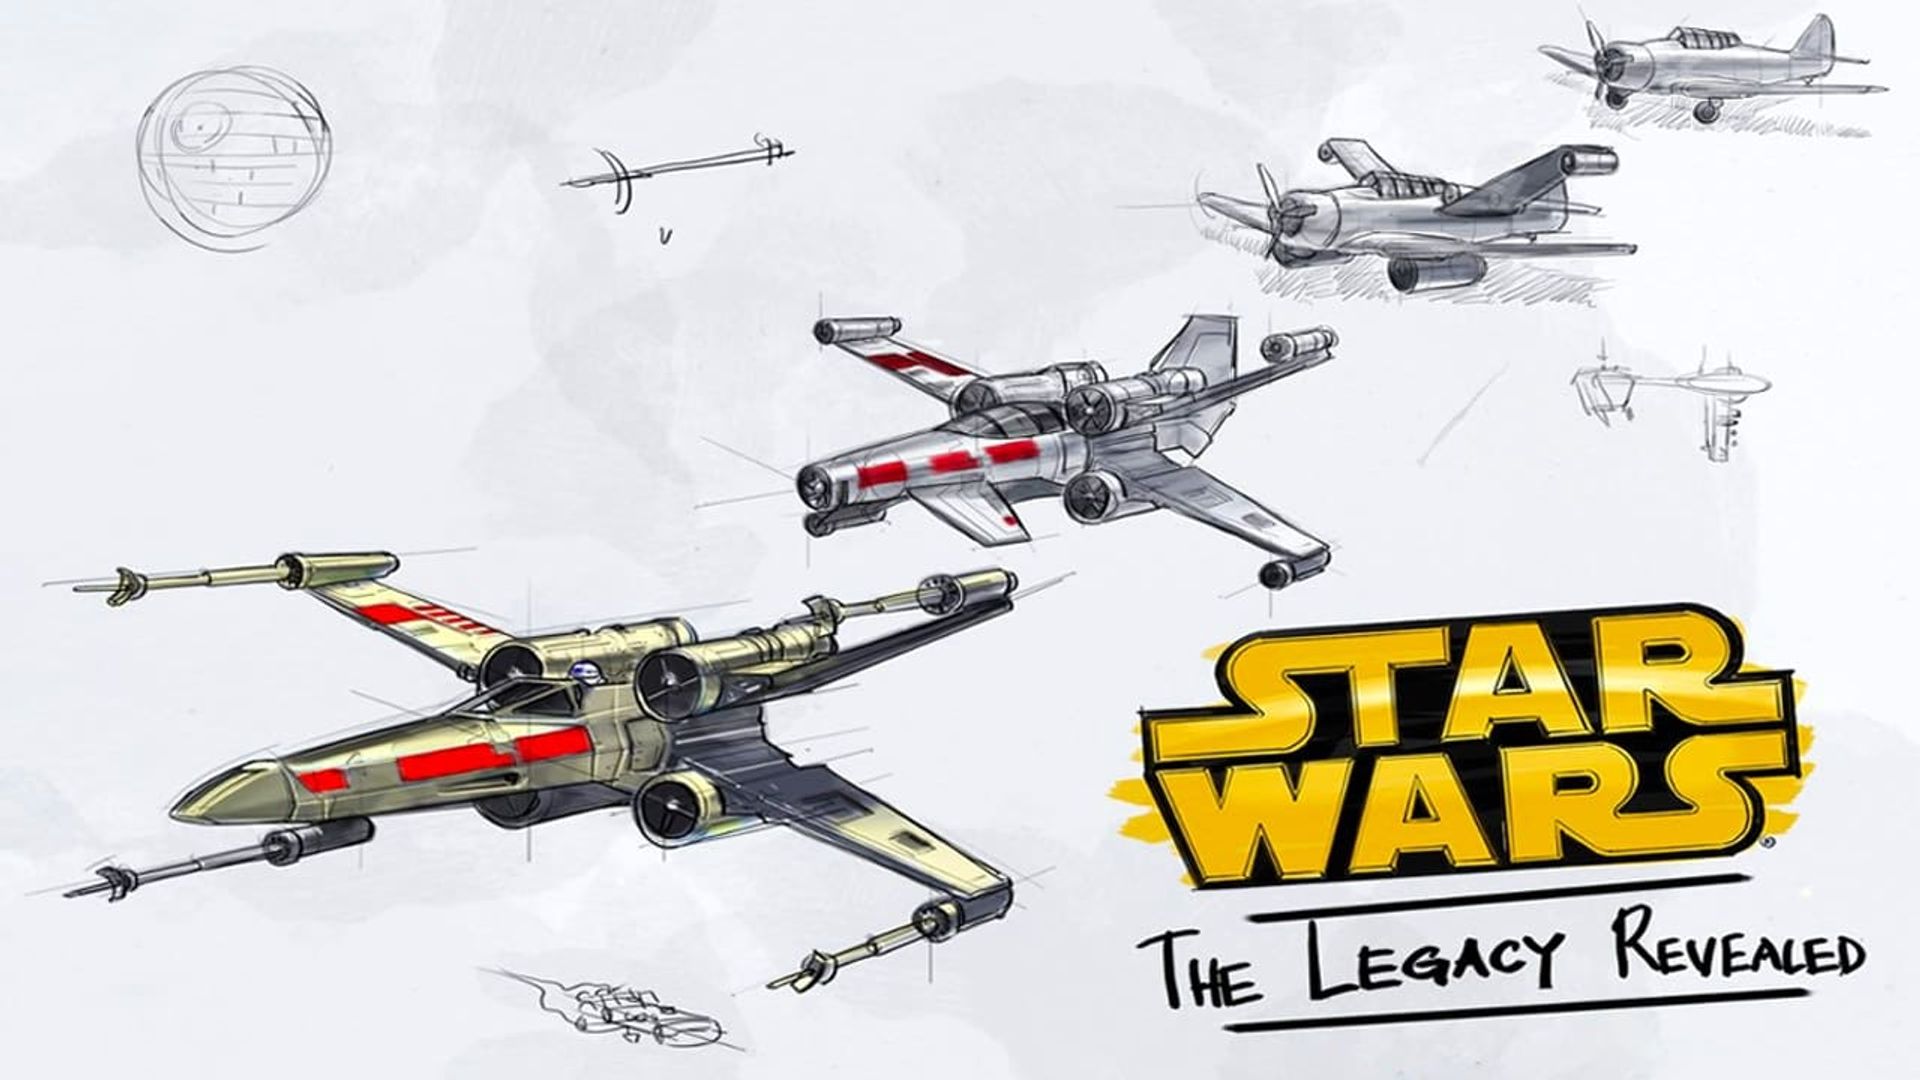 Star Wars: The Legacy Revealed background